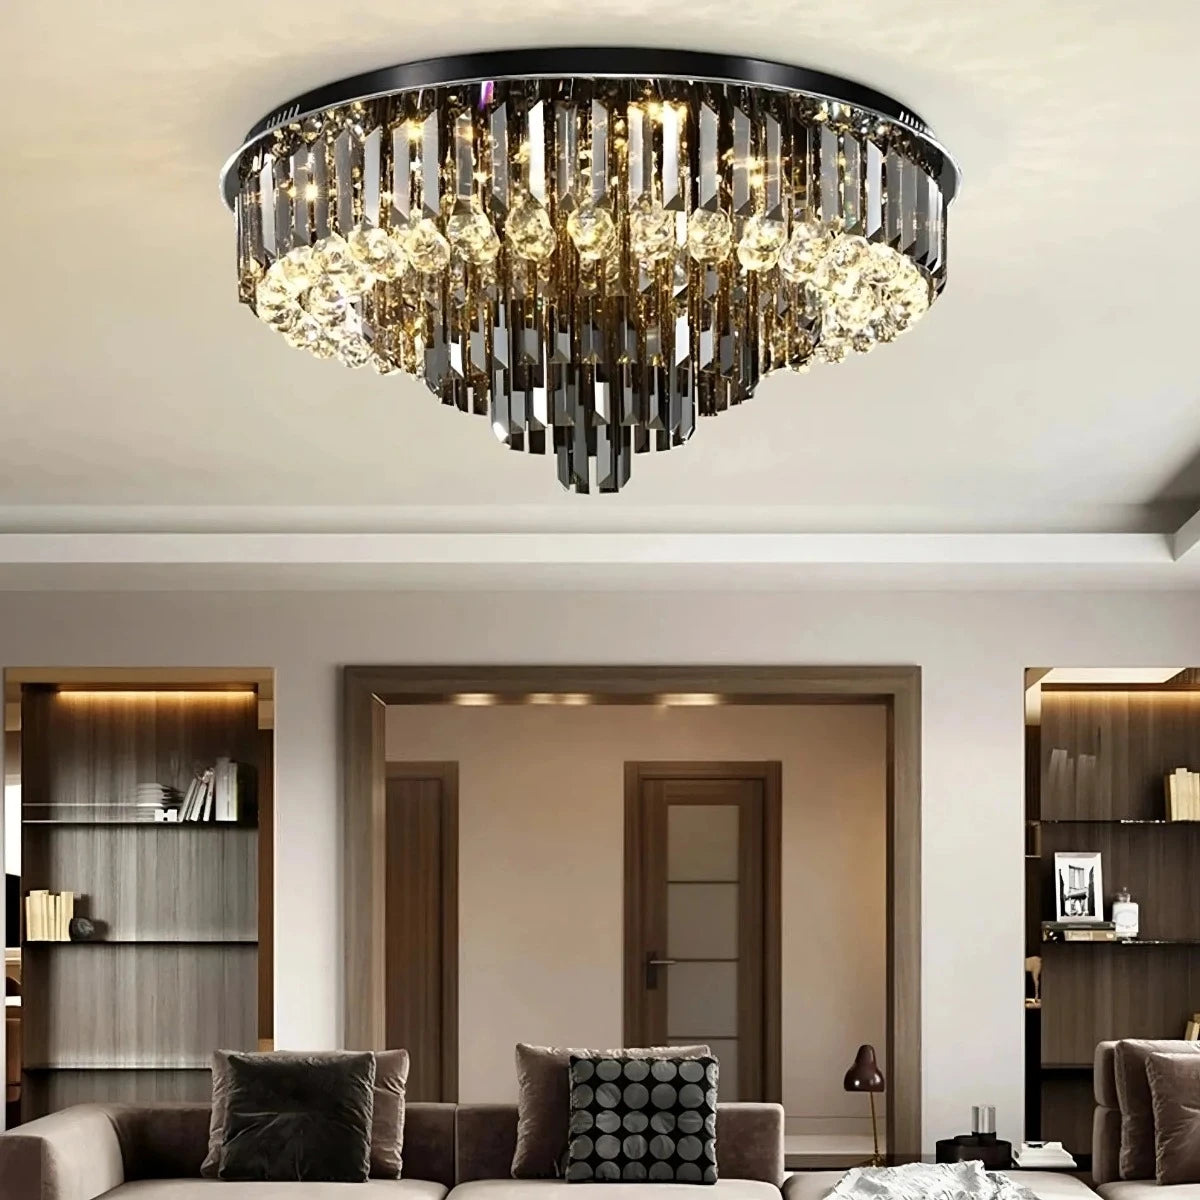 Gio Crystal Ceiling Chandelier